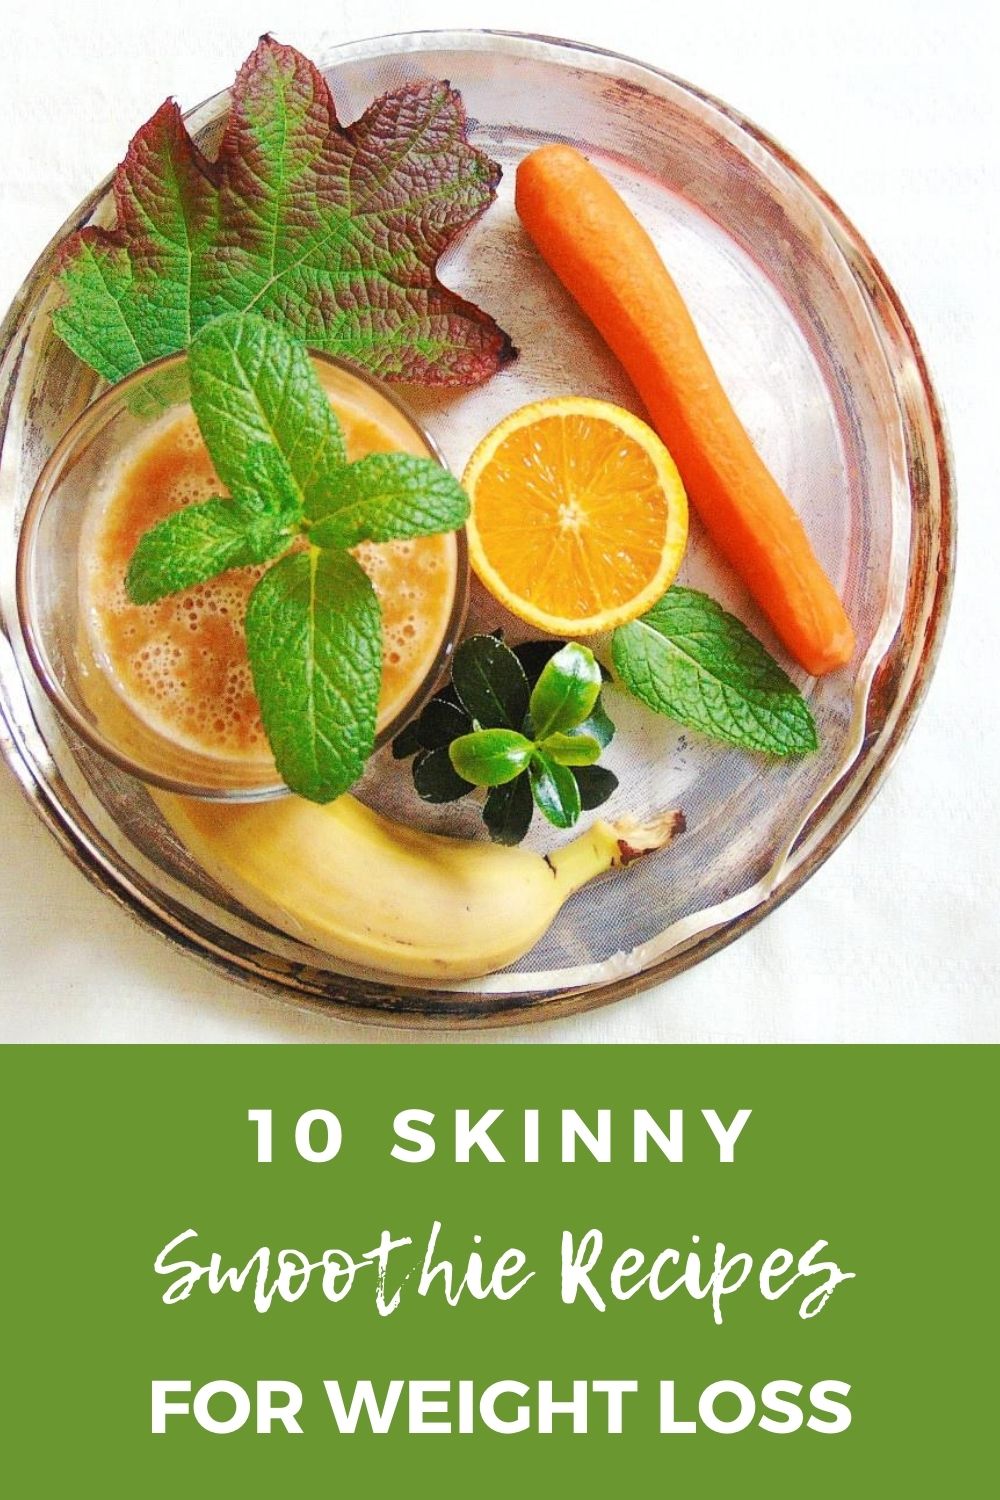 10 SKINNY SMOOTHIE RECIPES FOR WEIGHT LOSS ZDROWE SMOOTHIE